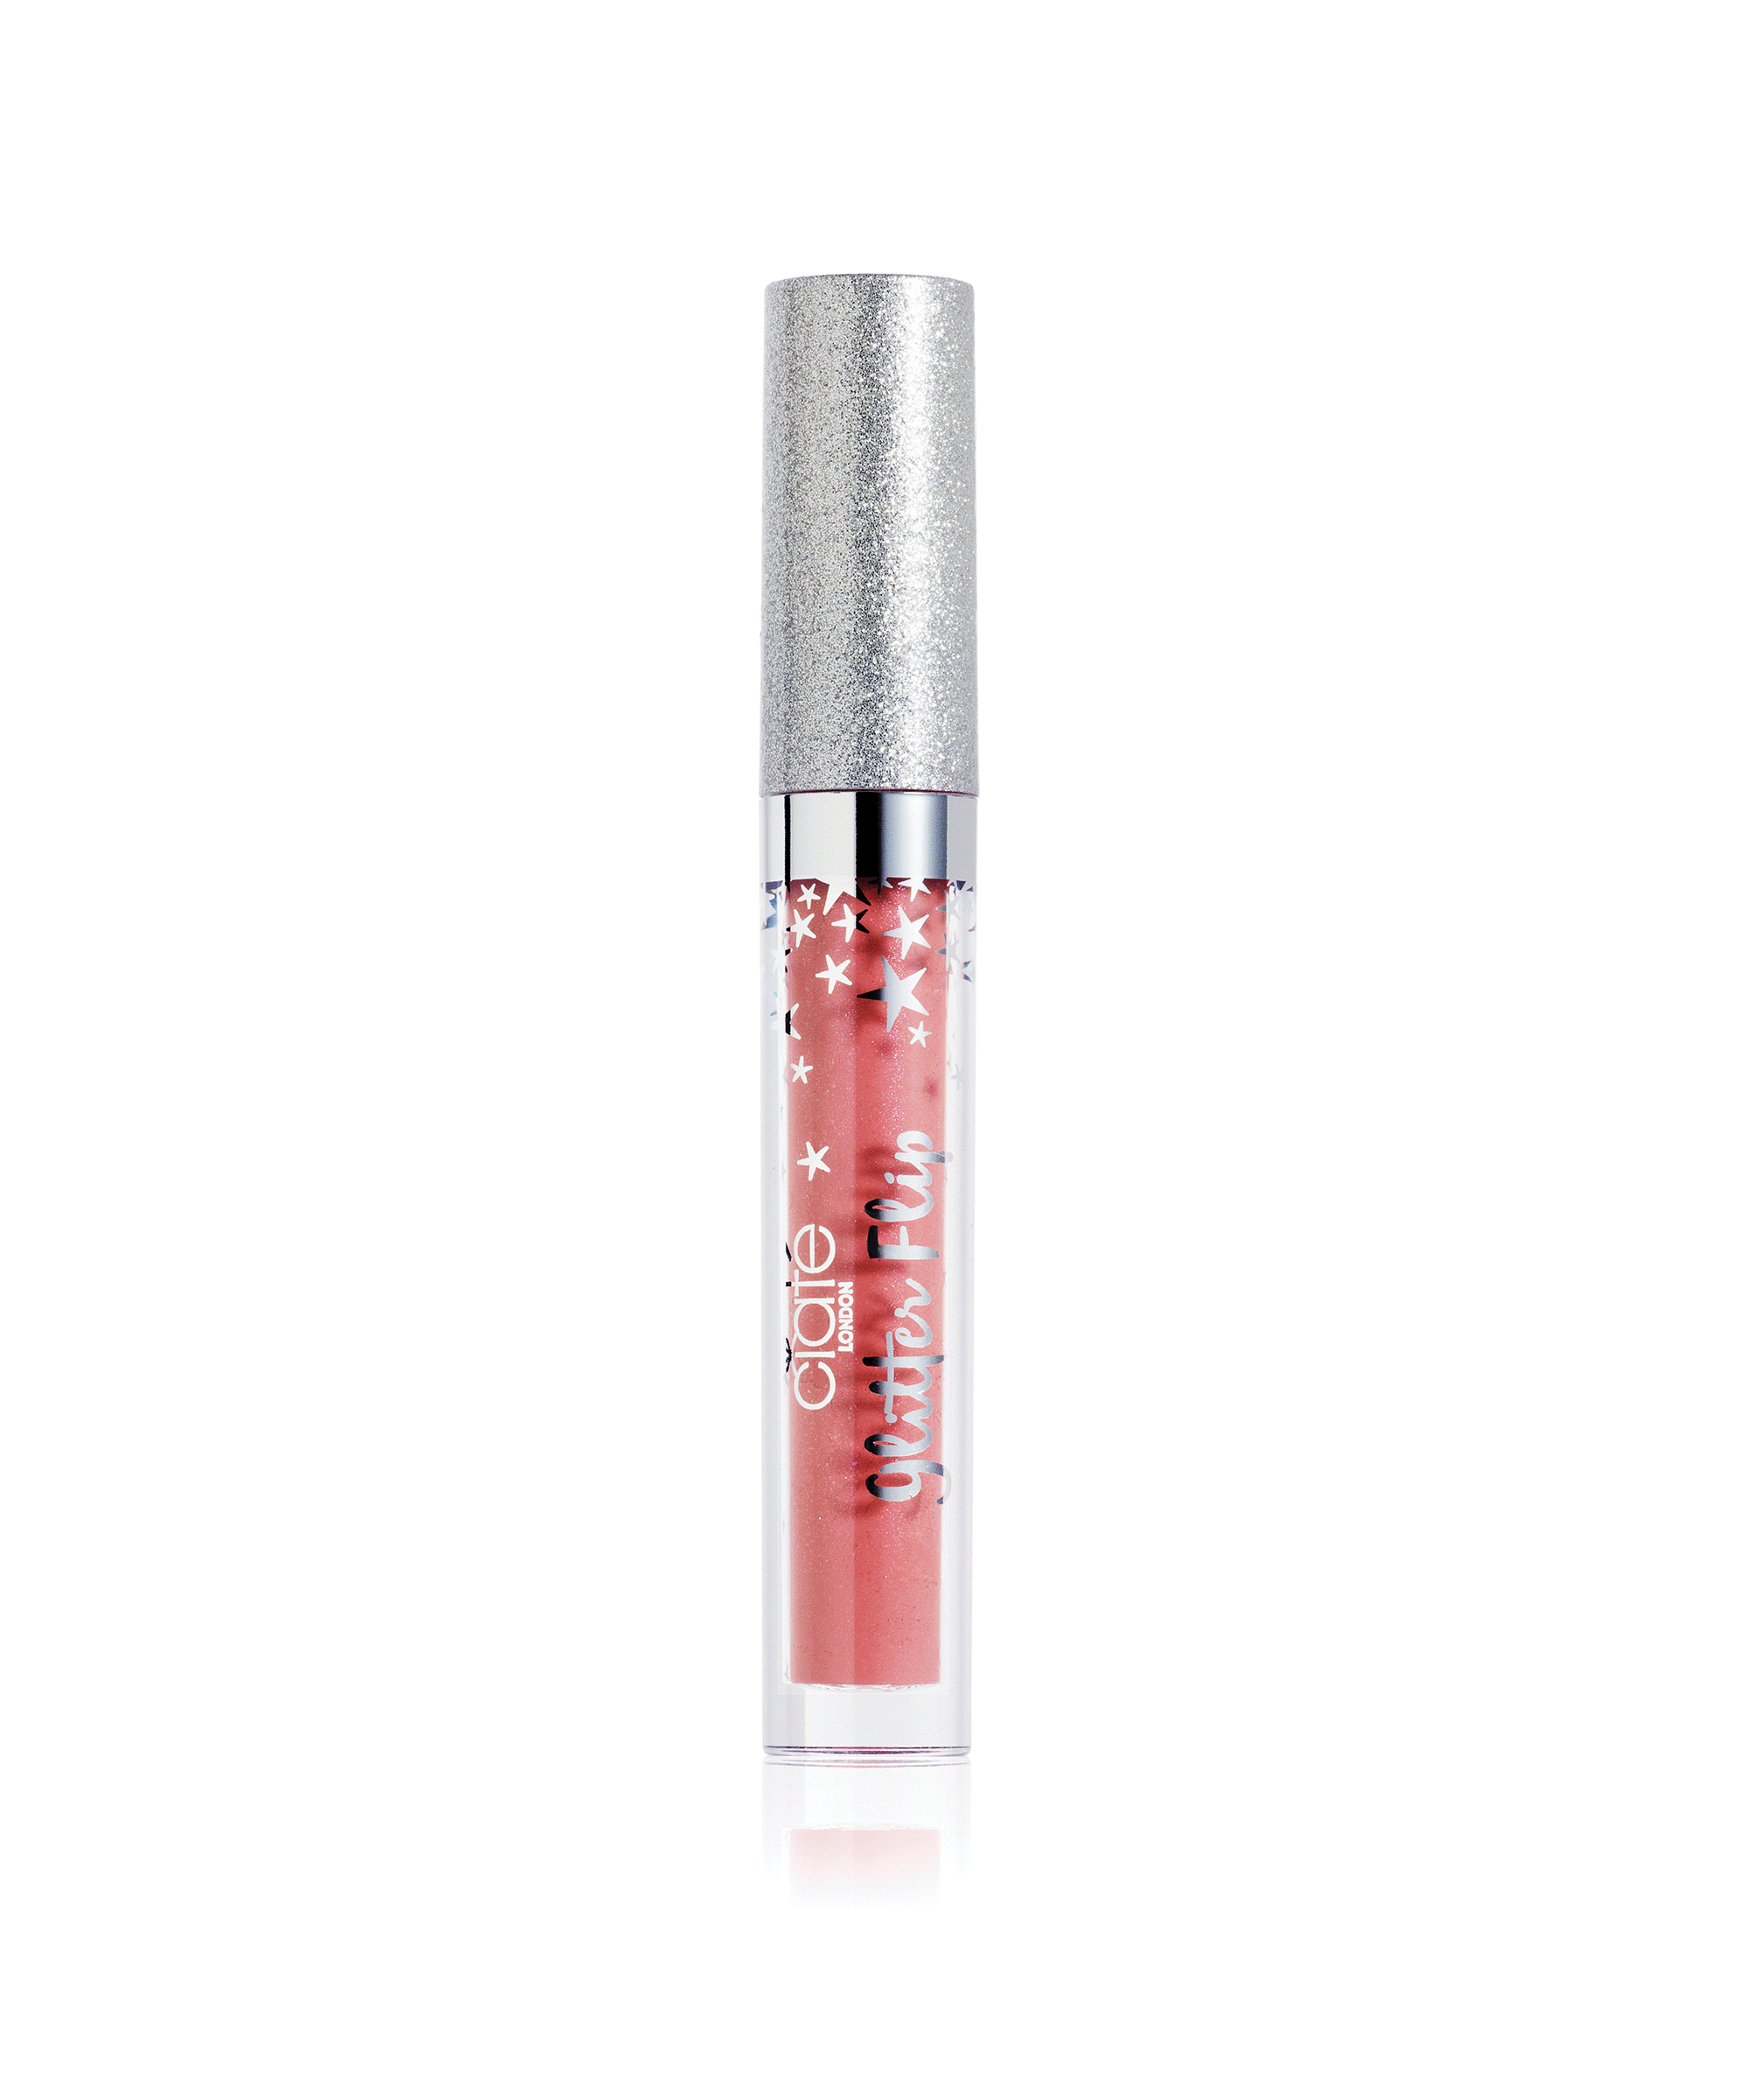 this best-selling liquid lipstick is finally back in stock & with new shades